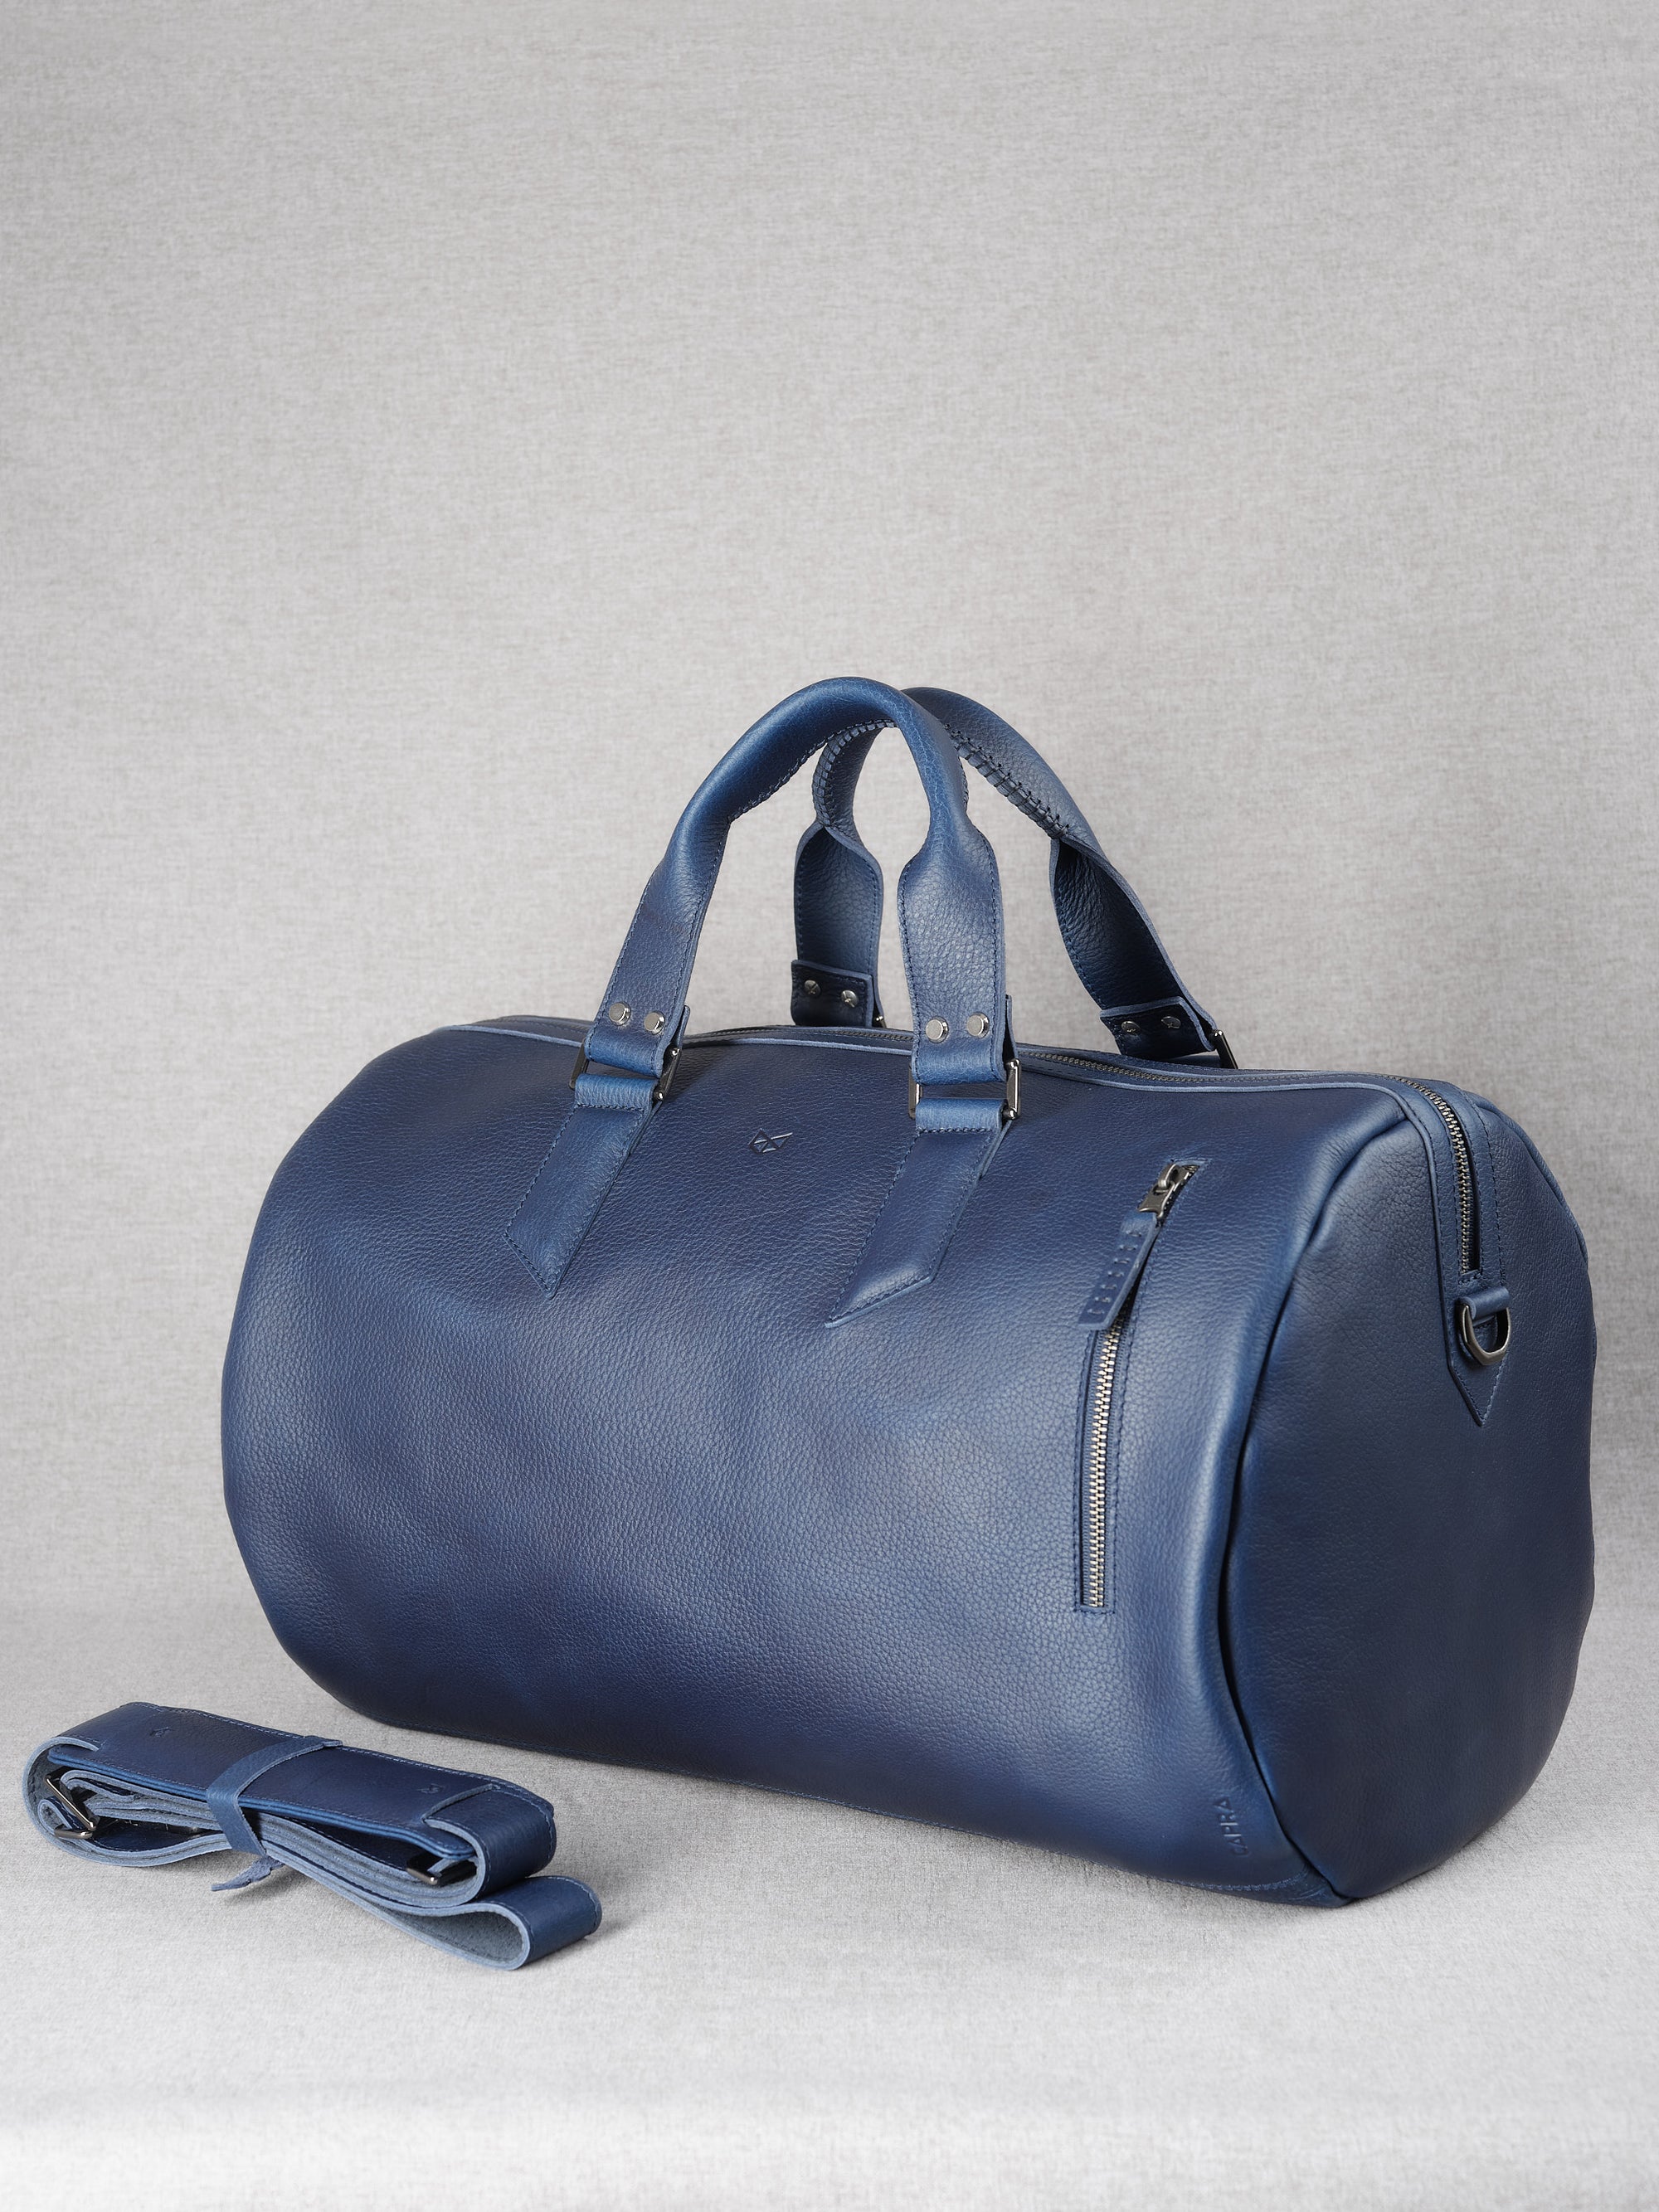 Functional bag. Substantial Duffle Bag Navy by Capra Leather